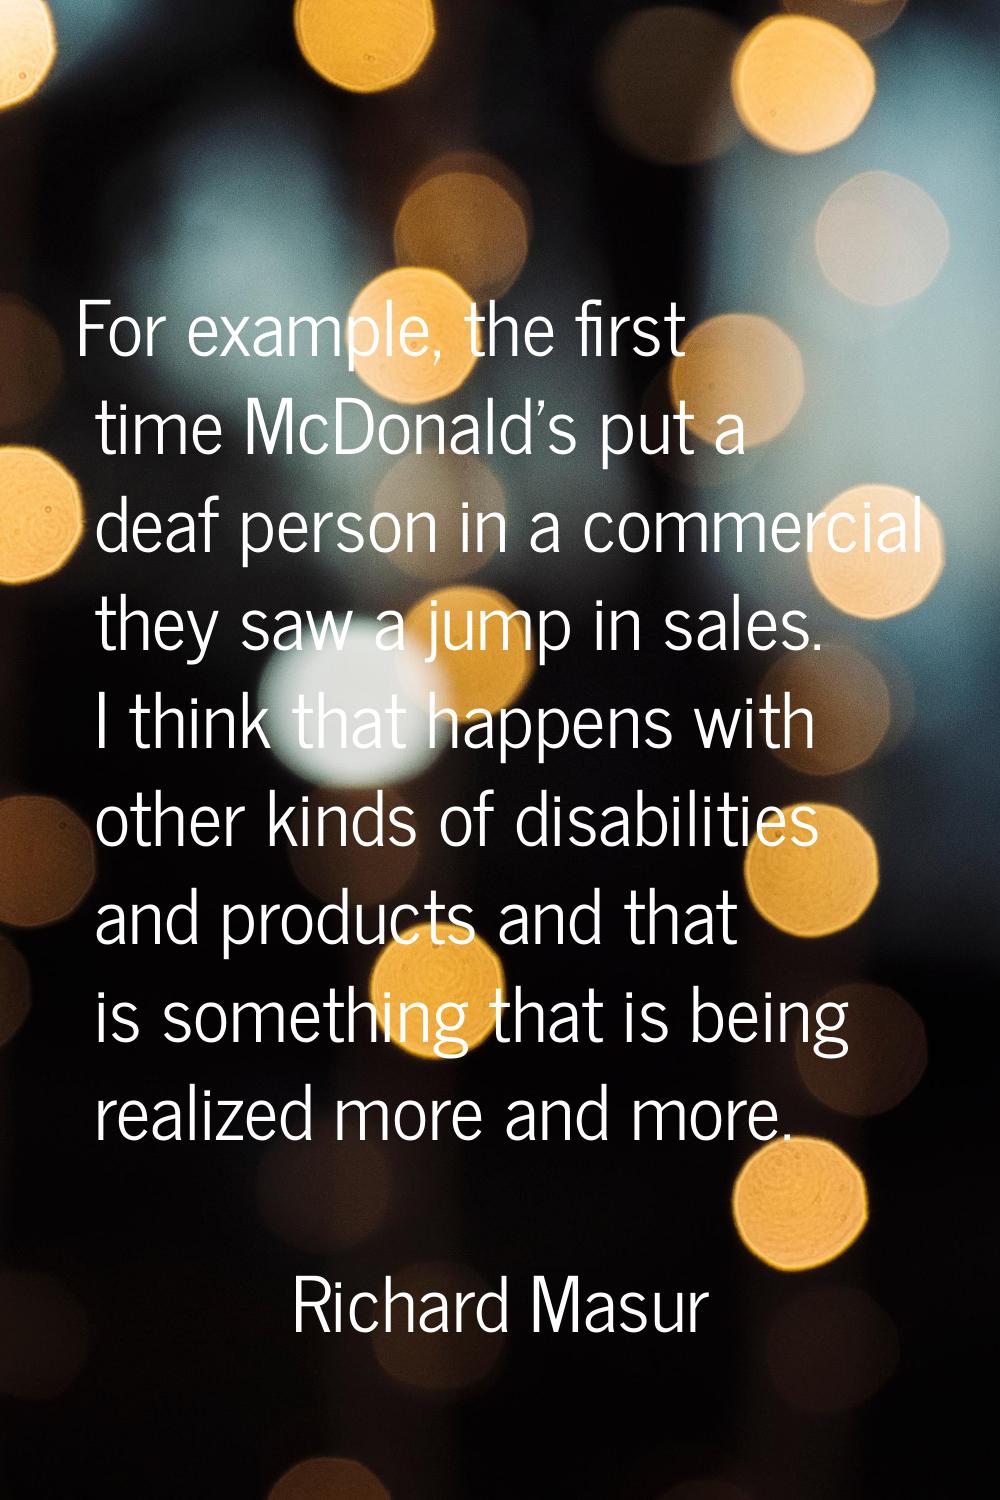 For example, the first time McDonald's put a deaf person in a commercial they saw a jump in sales. 